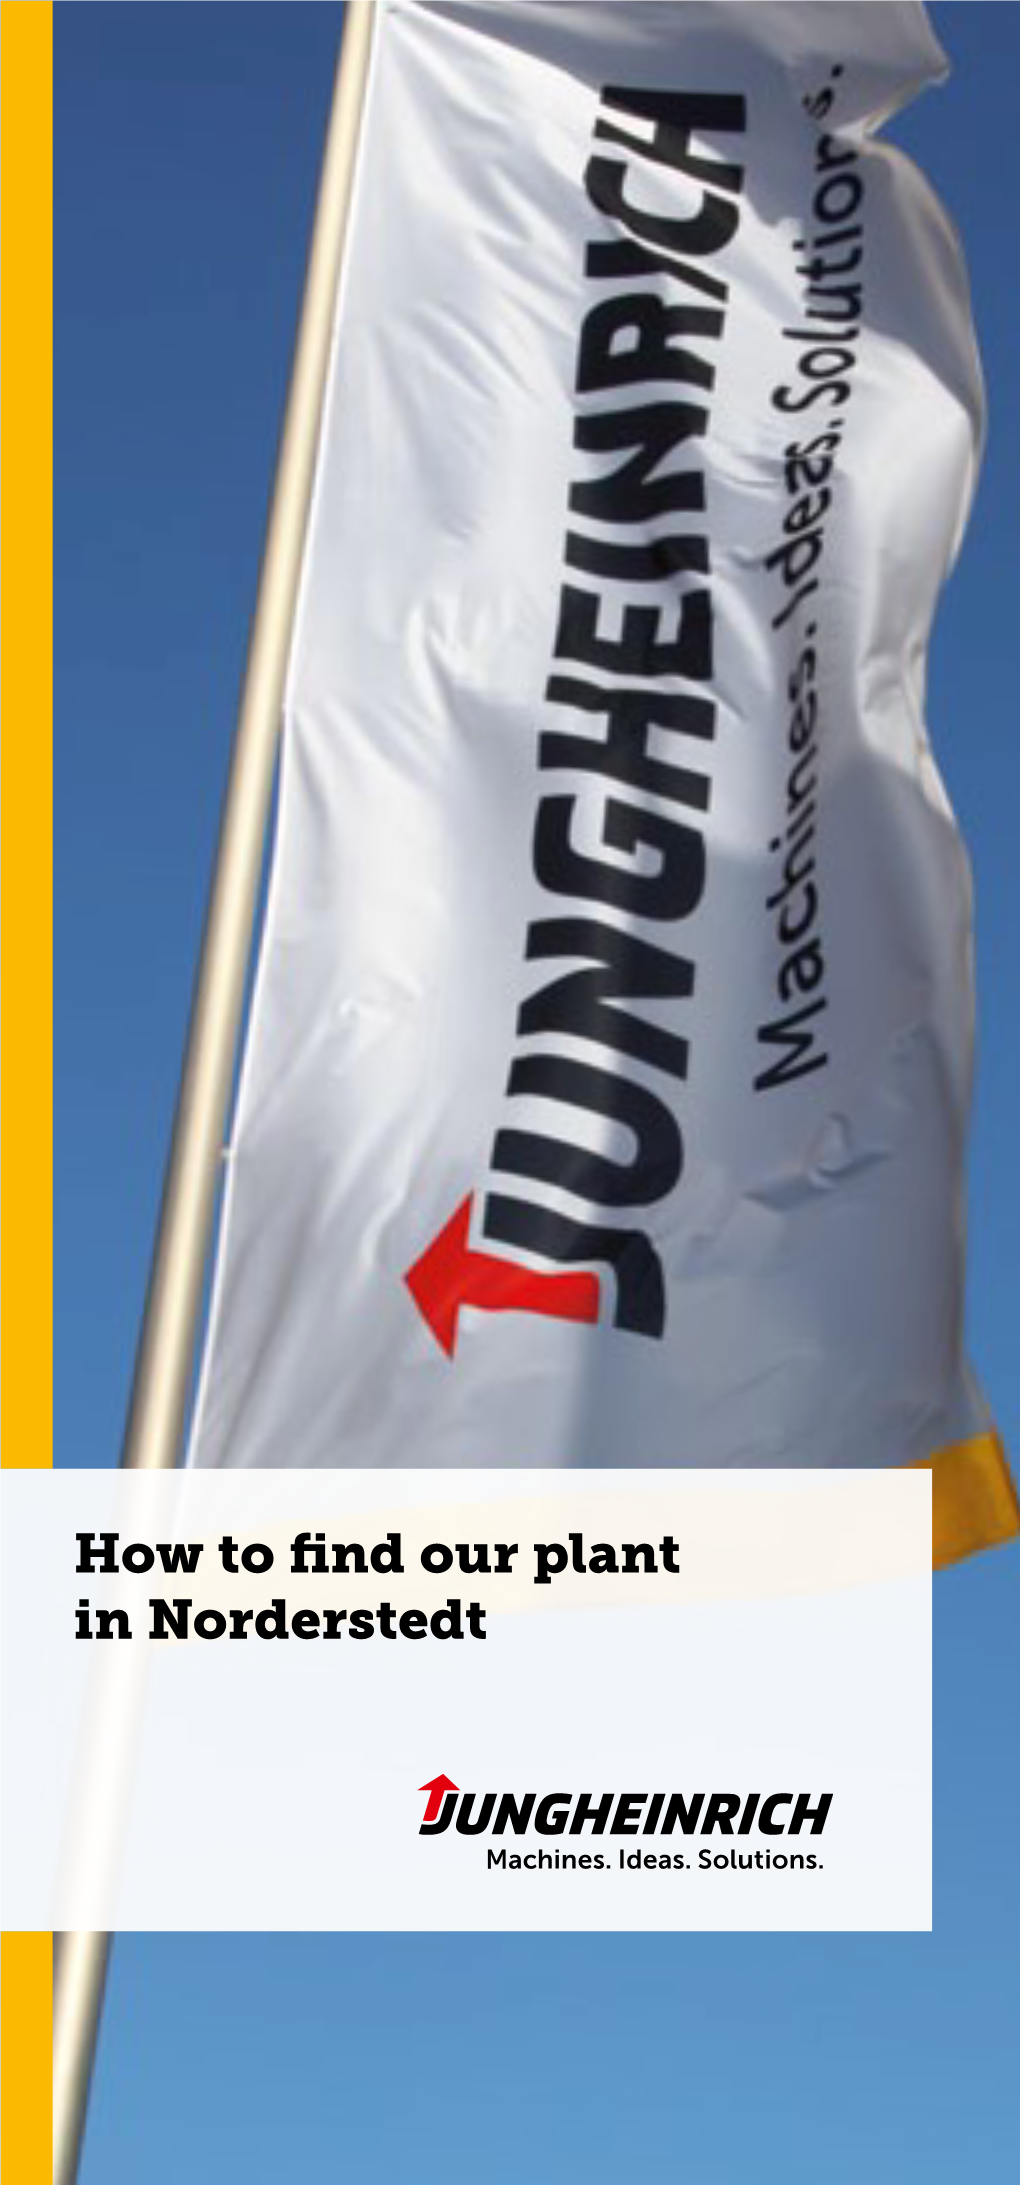 How to Find Our Plant in Norderstedt